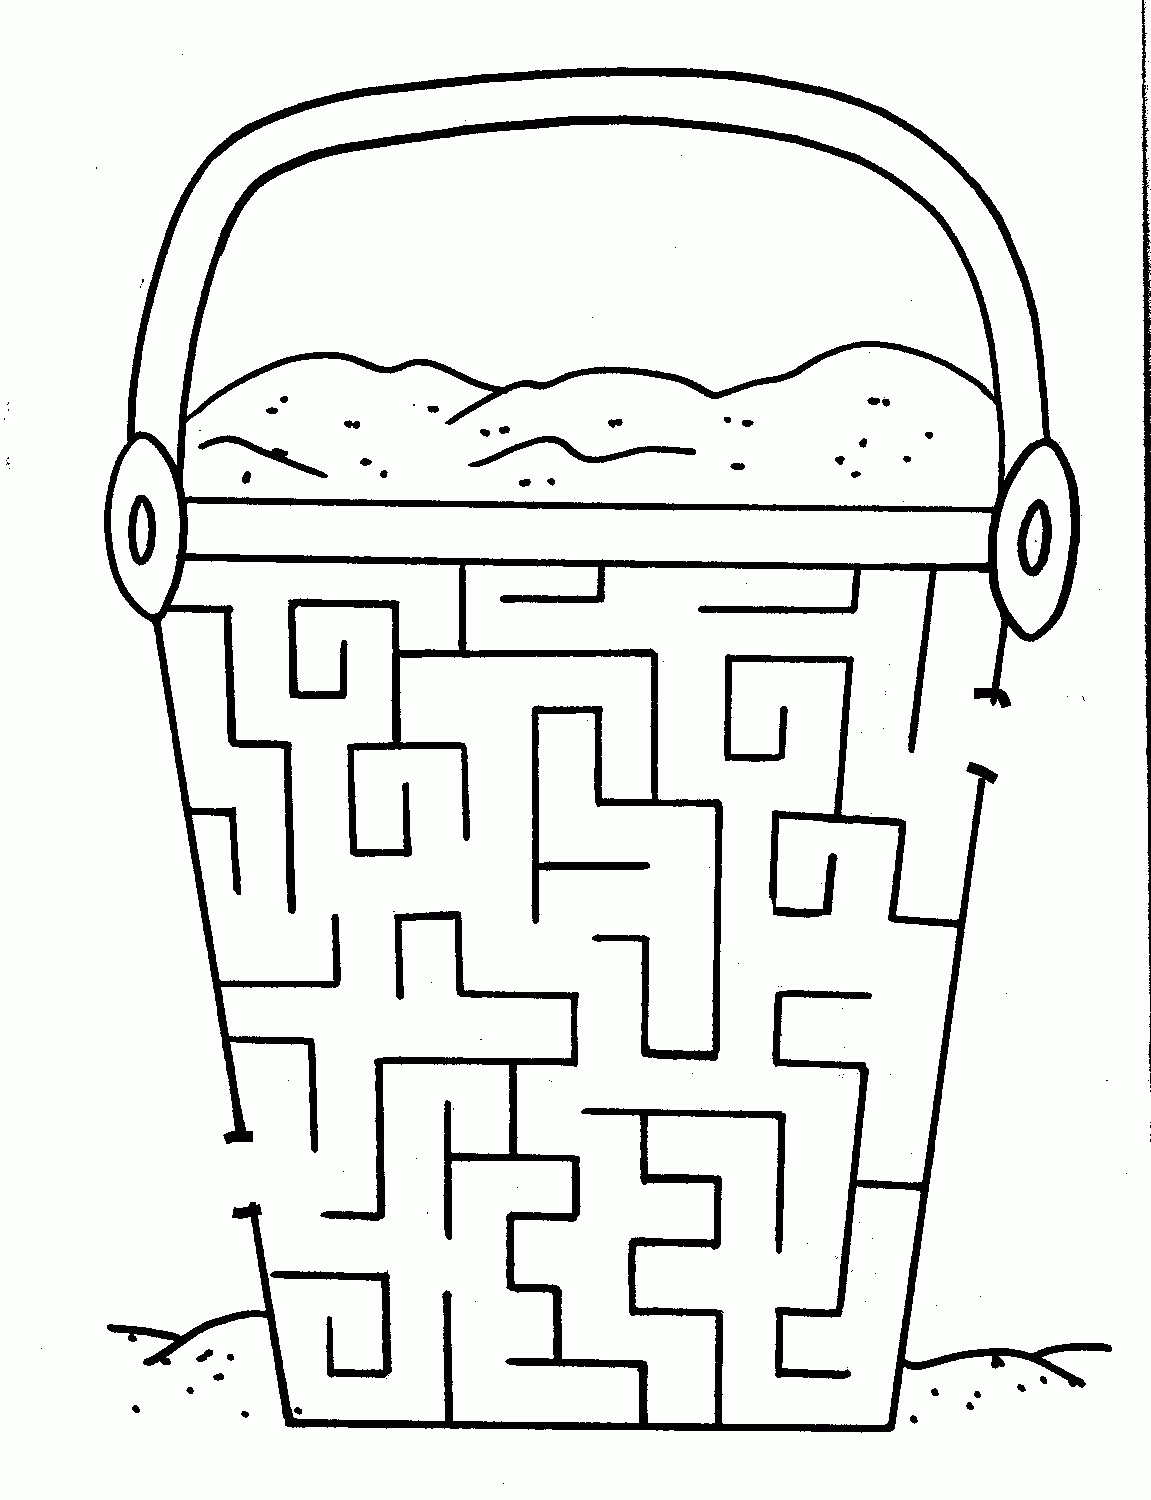 Try Your Hand At Our Free Printable Mazes For Kids. | Kids - Free Printable Mazes For Kids